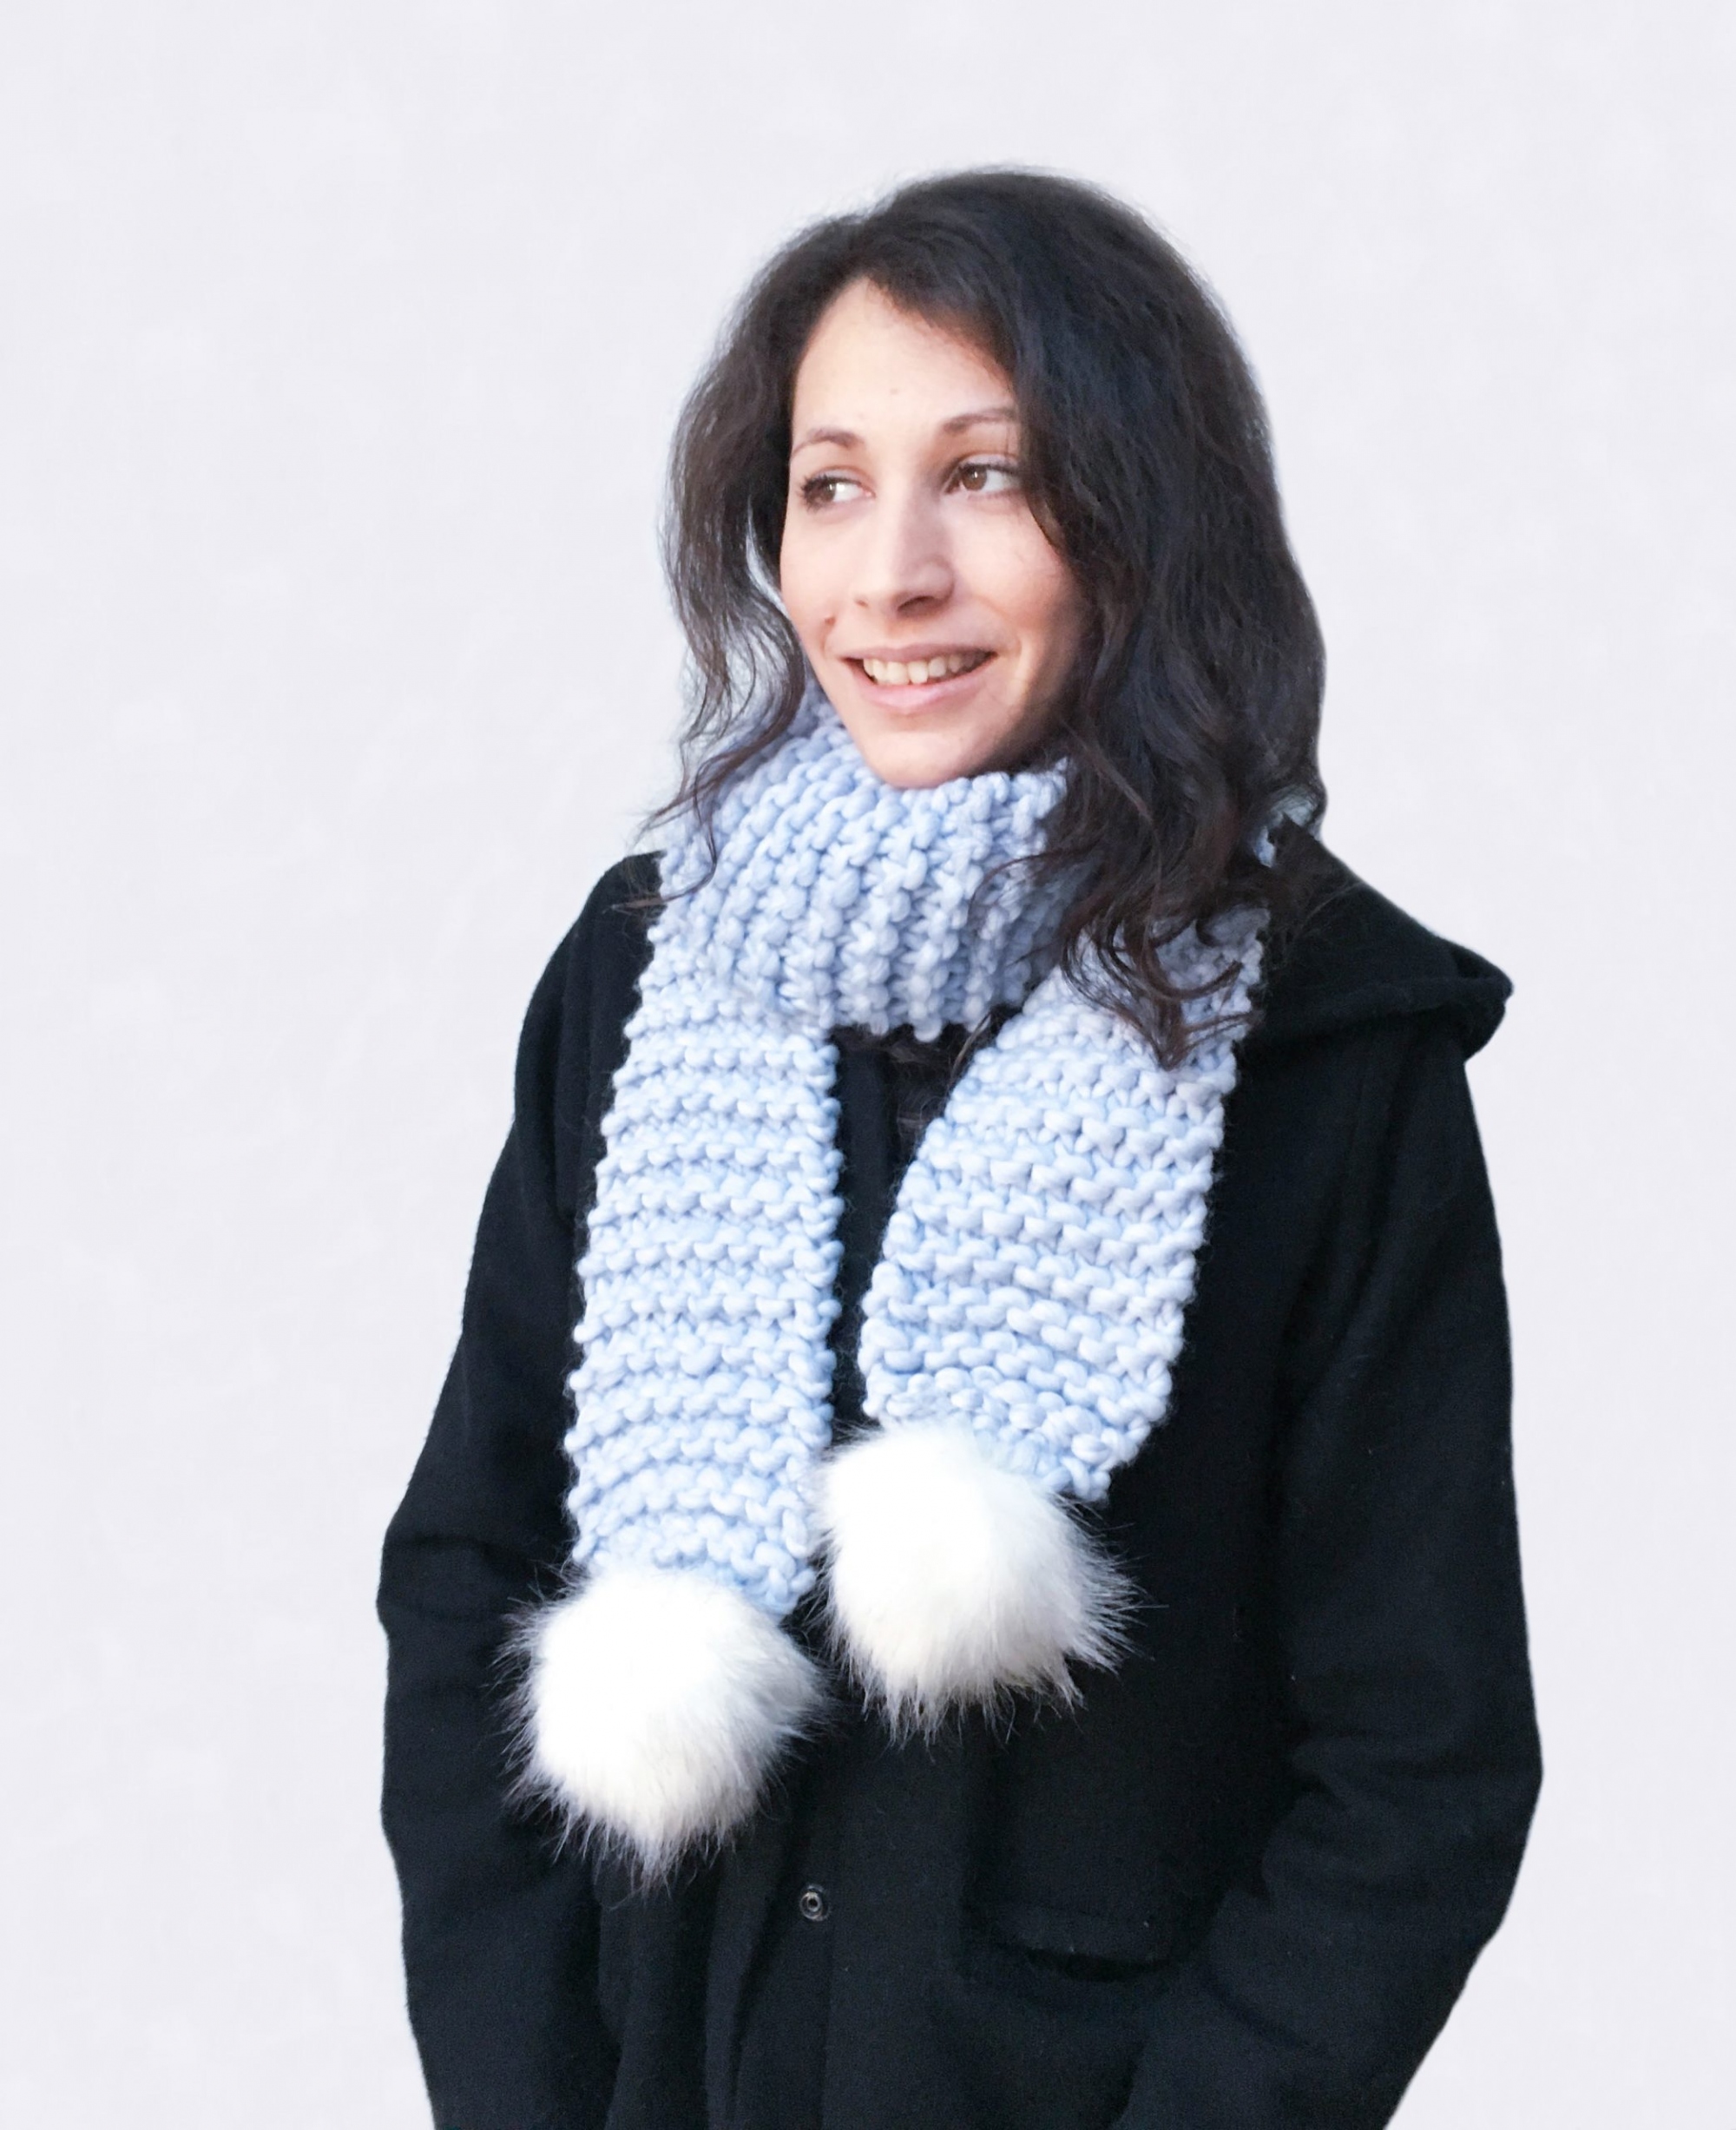 Handmade woolly scarves - Periwinkle scarf with white furry pom poms. Click to customise.